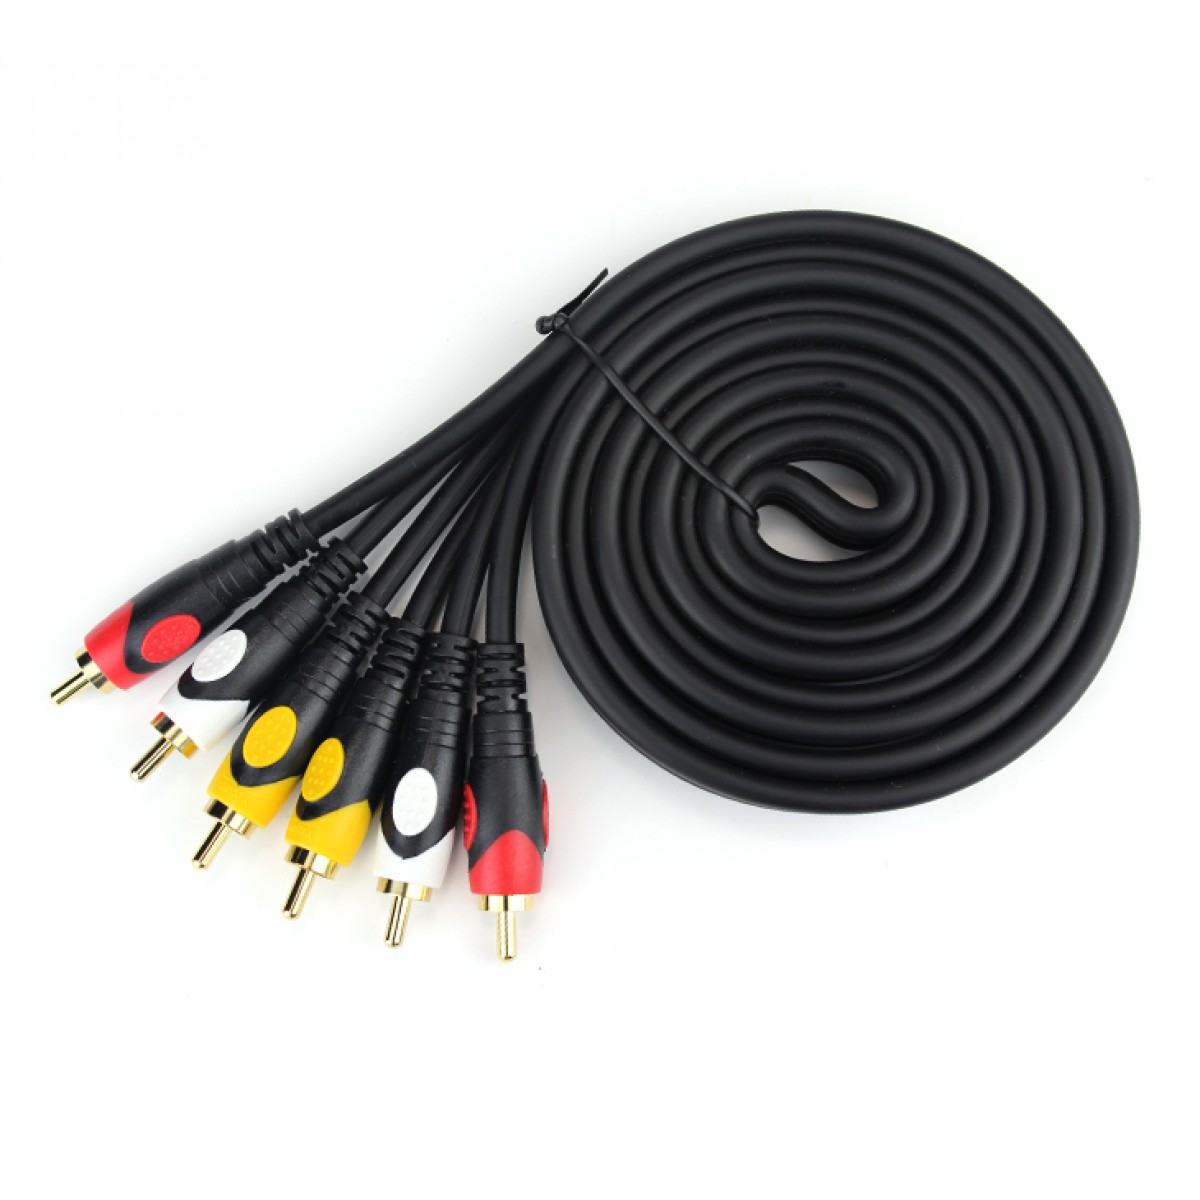 TY-1526 3xRCA male to 3xRCA male audio cable